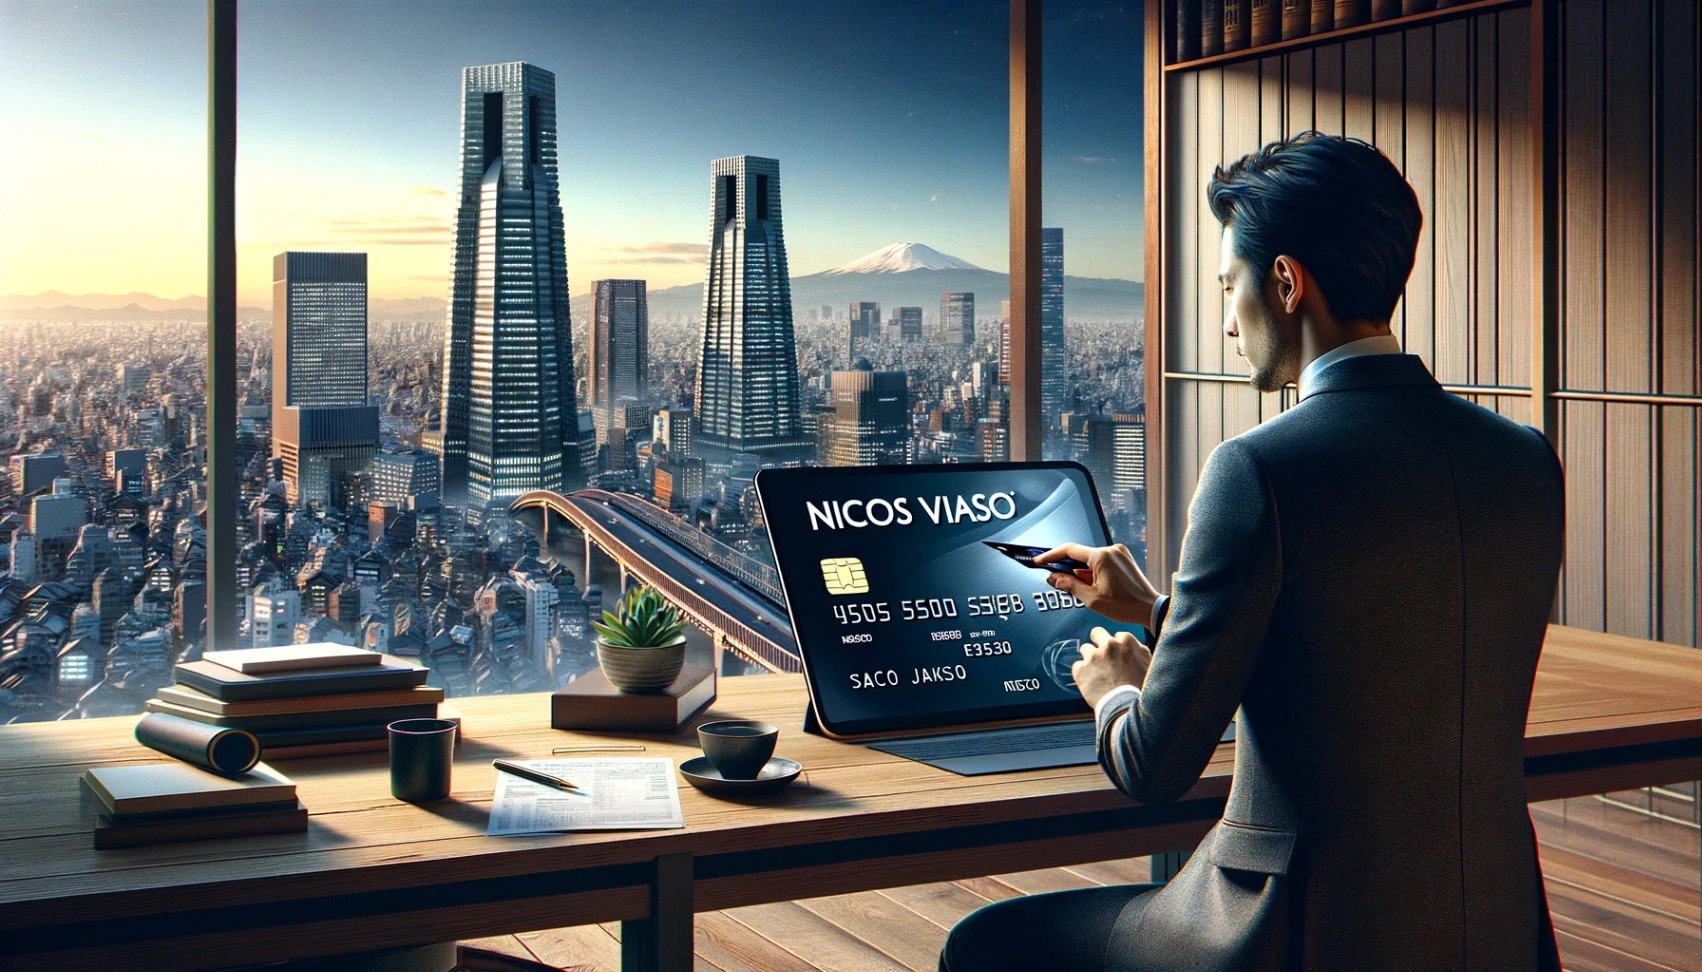 Nicos Viaso Credit Card: Learn How to Apply Now